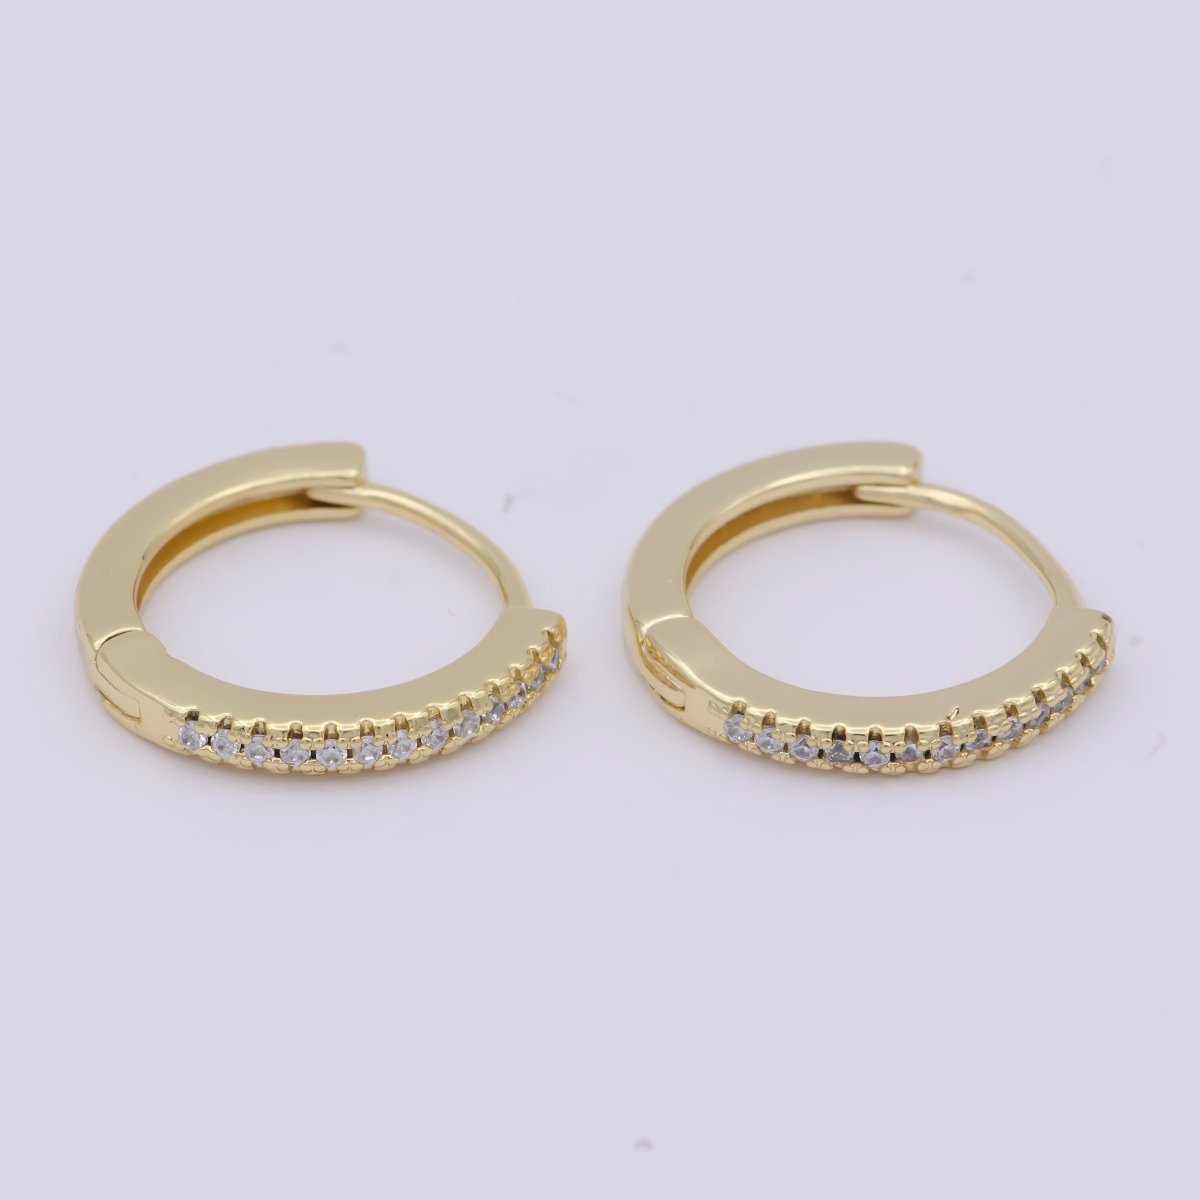 Micro Pave Huggie Earrings Gold / Silver Huggie Hoops • Minimalist Gold Earrings • Perfect Gift for Her T-016 - DLUXCA